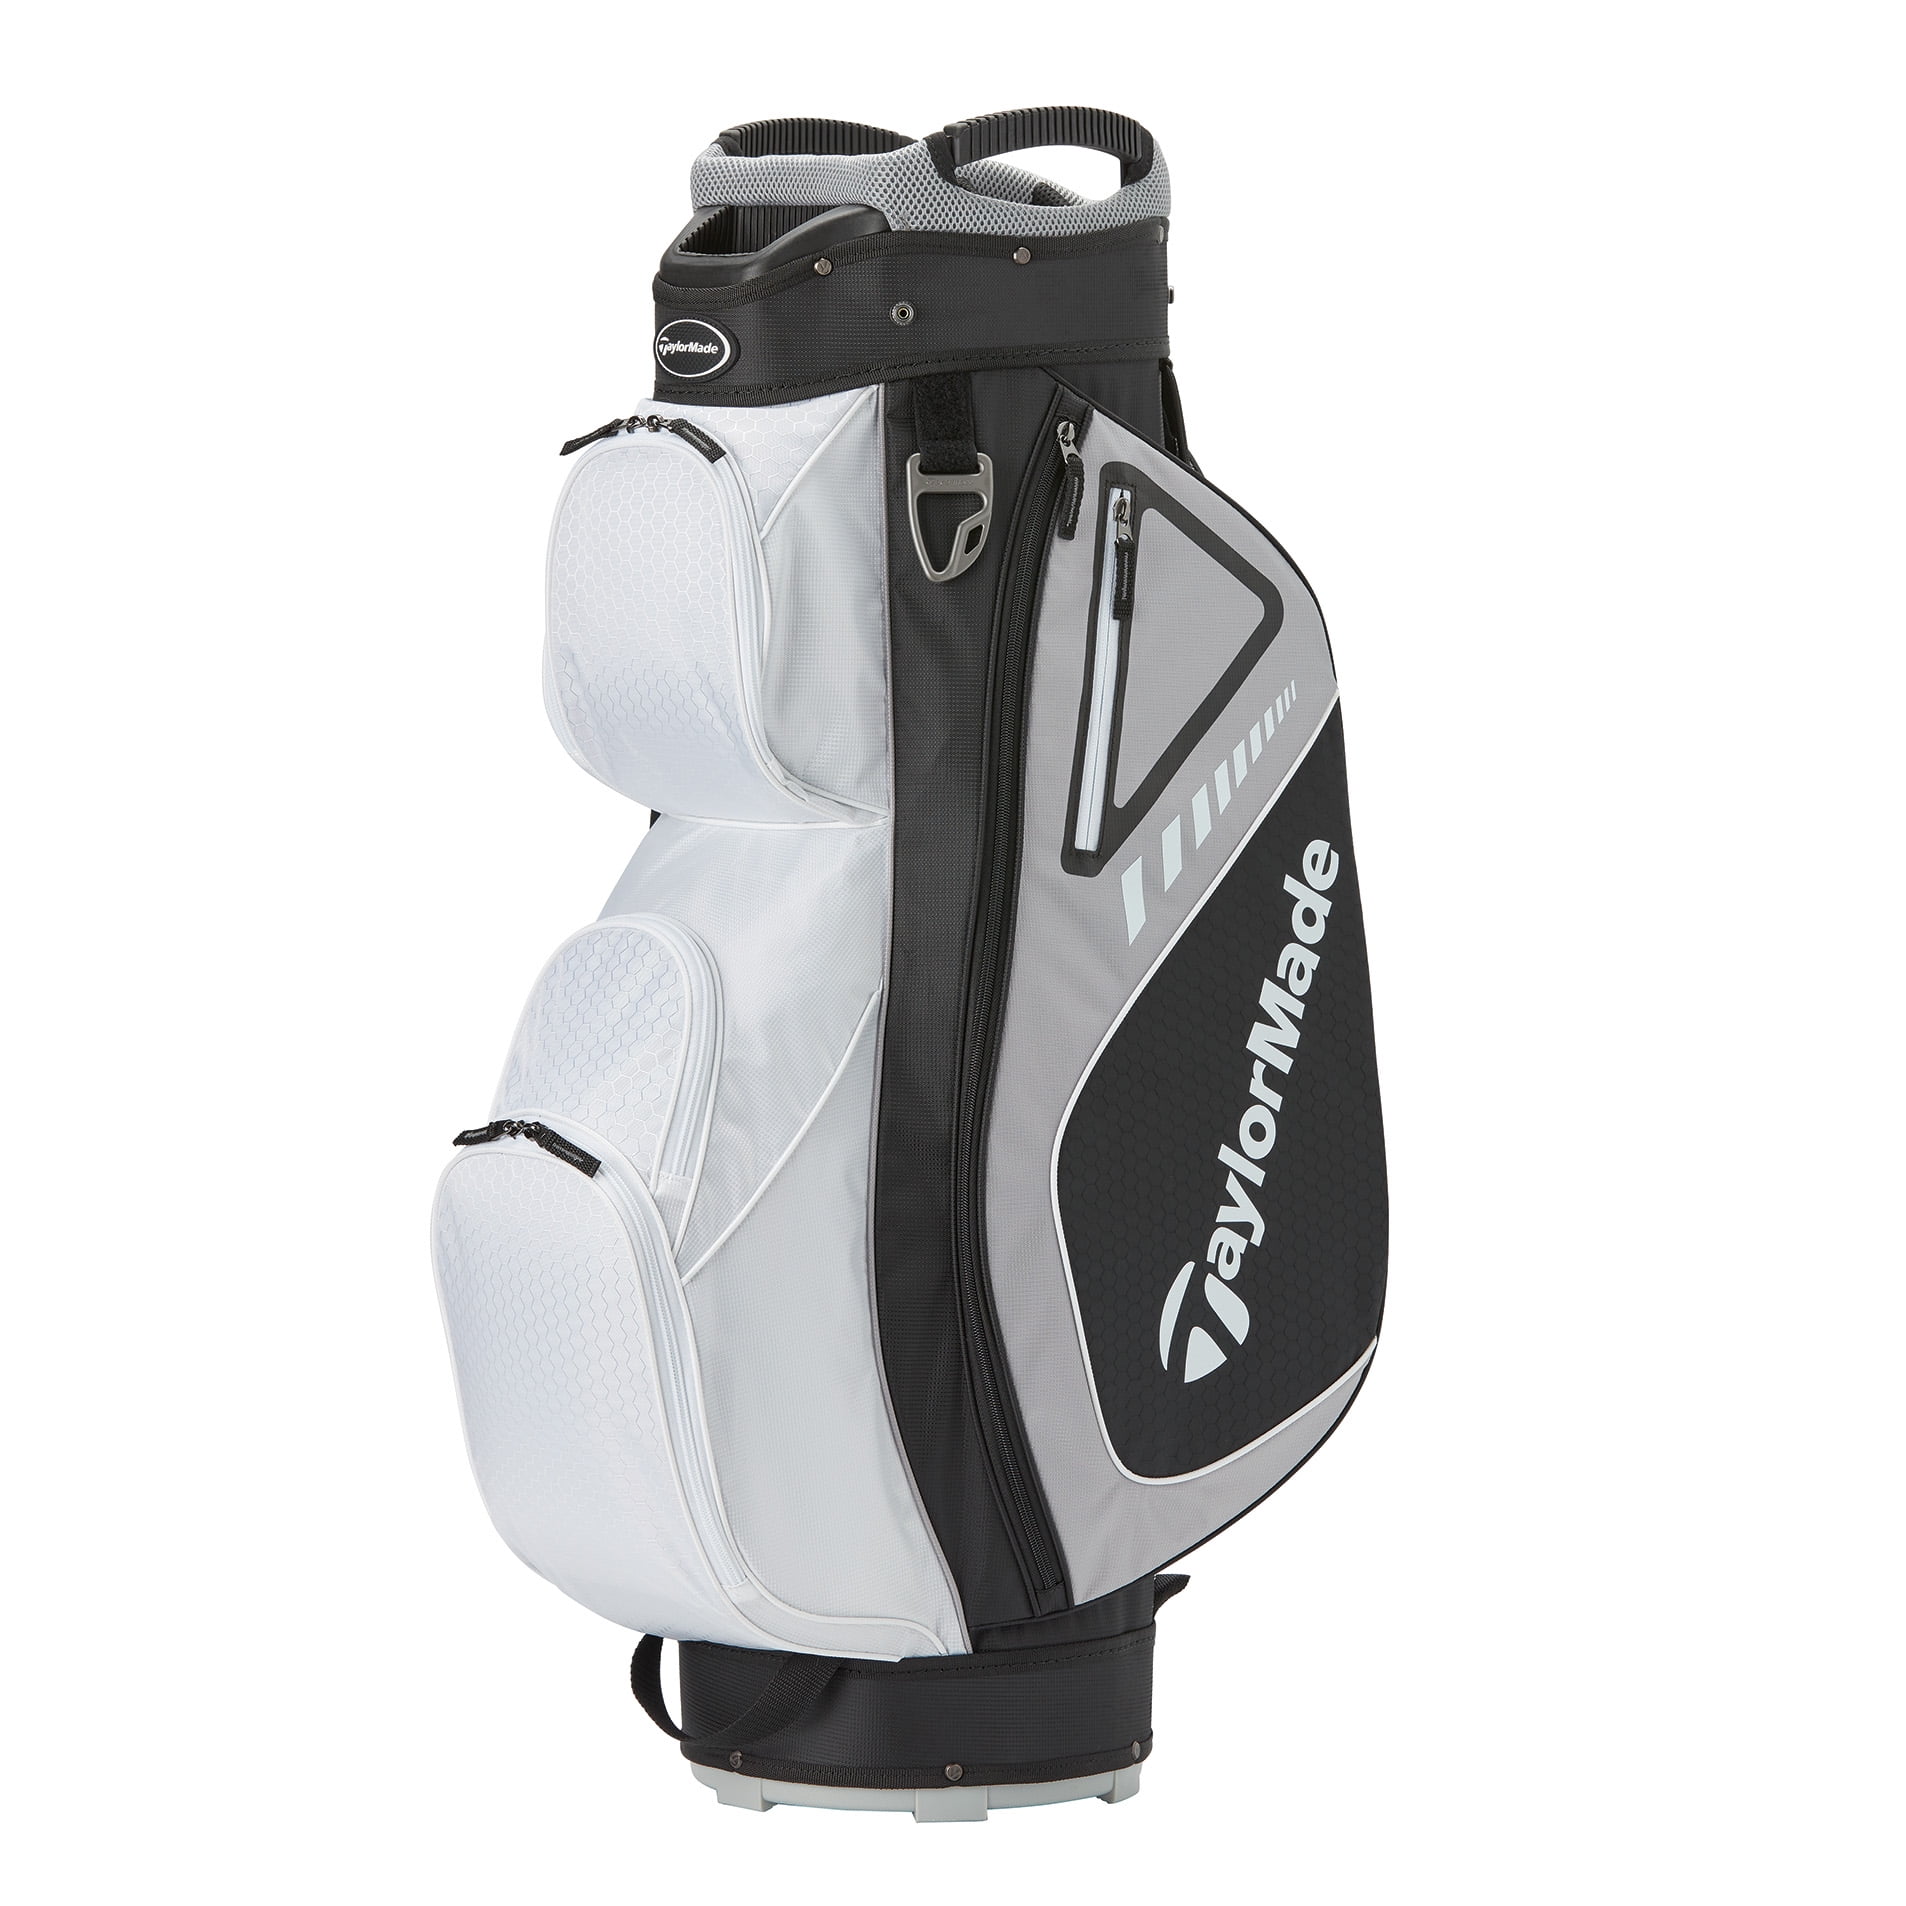 Bread Take out detergent TaylorMade Select ST Cart Golf Bag White/Black - Walmart.com